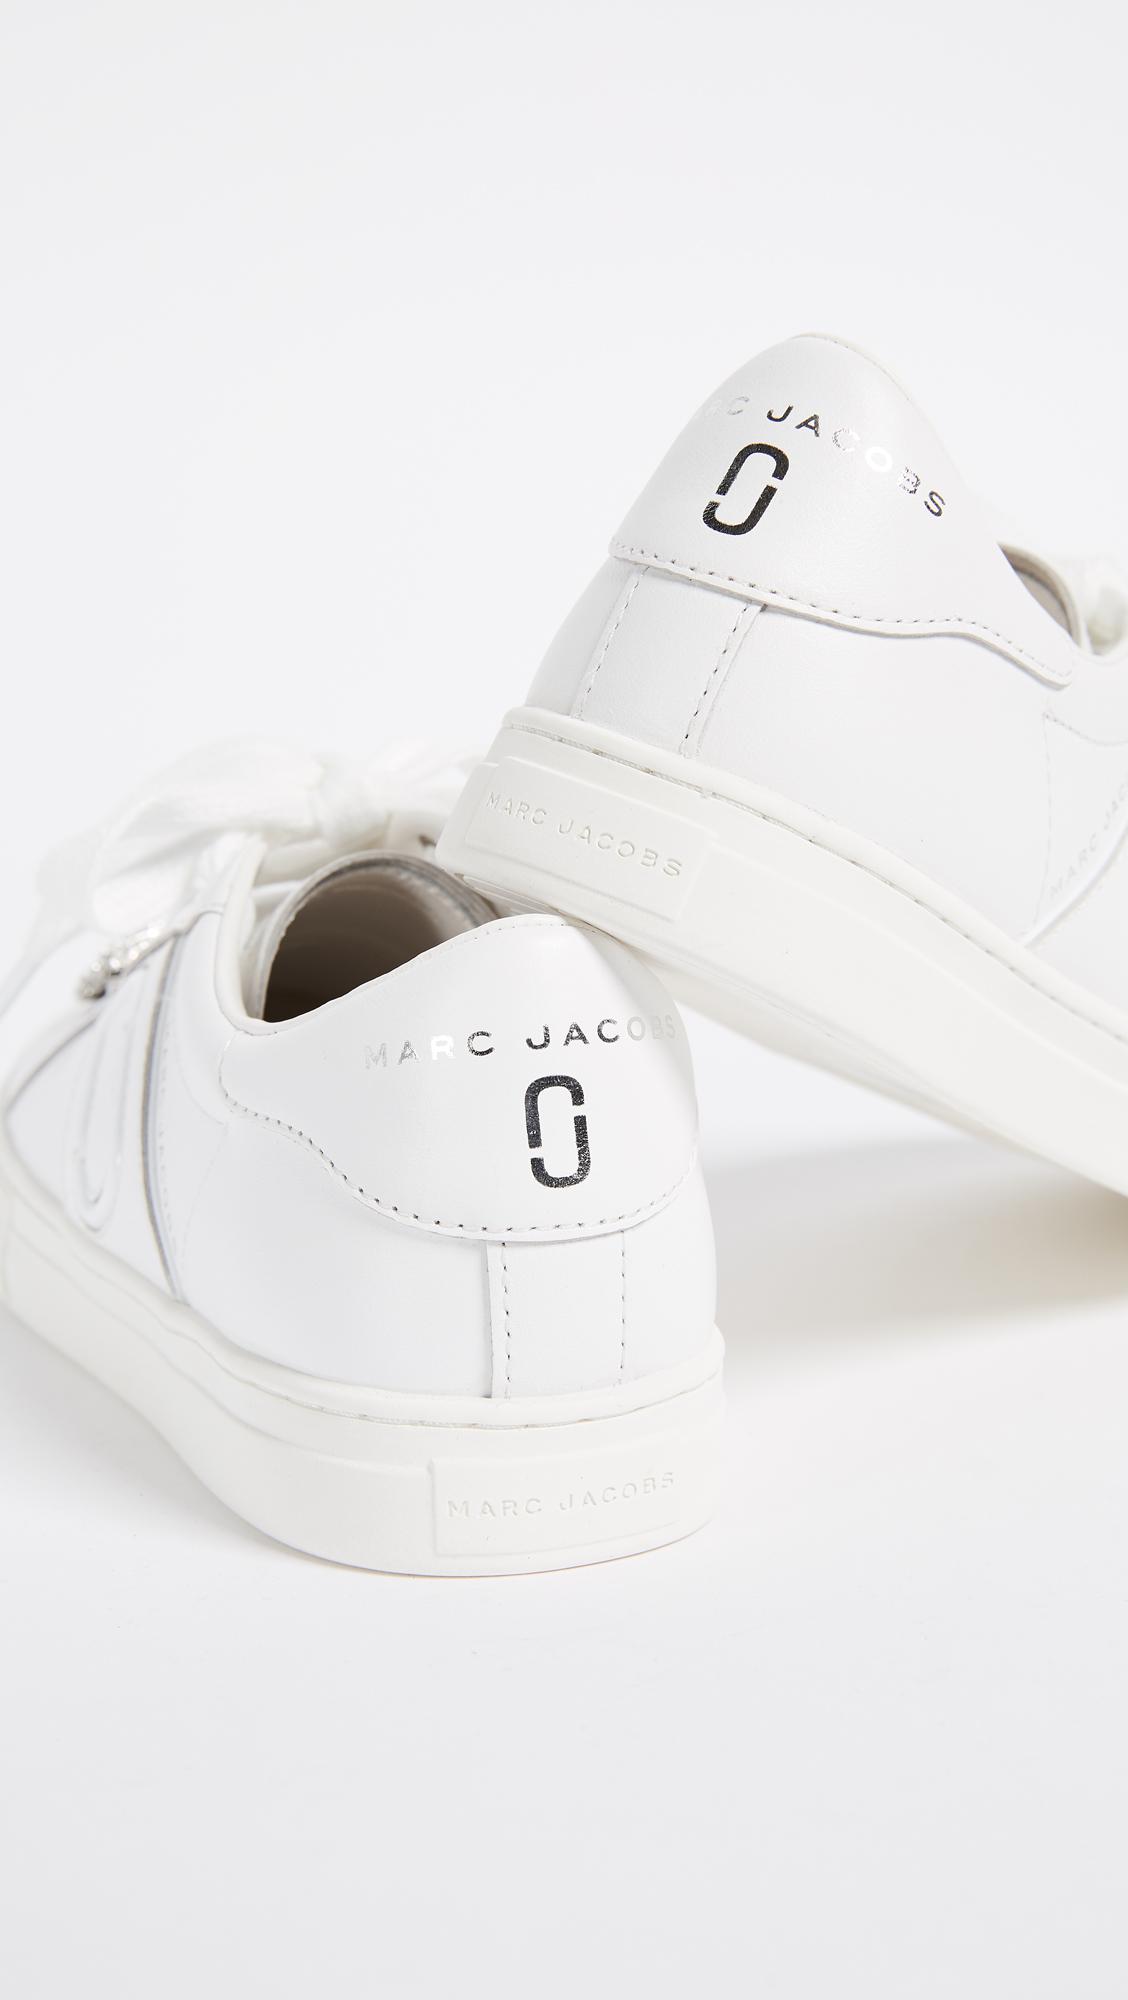 Marc Jacobs Leather Empire Chain Link Sneakers in White - Lyst